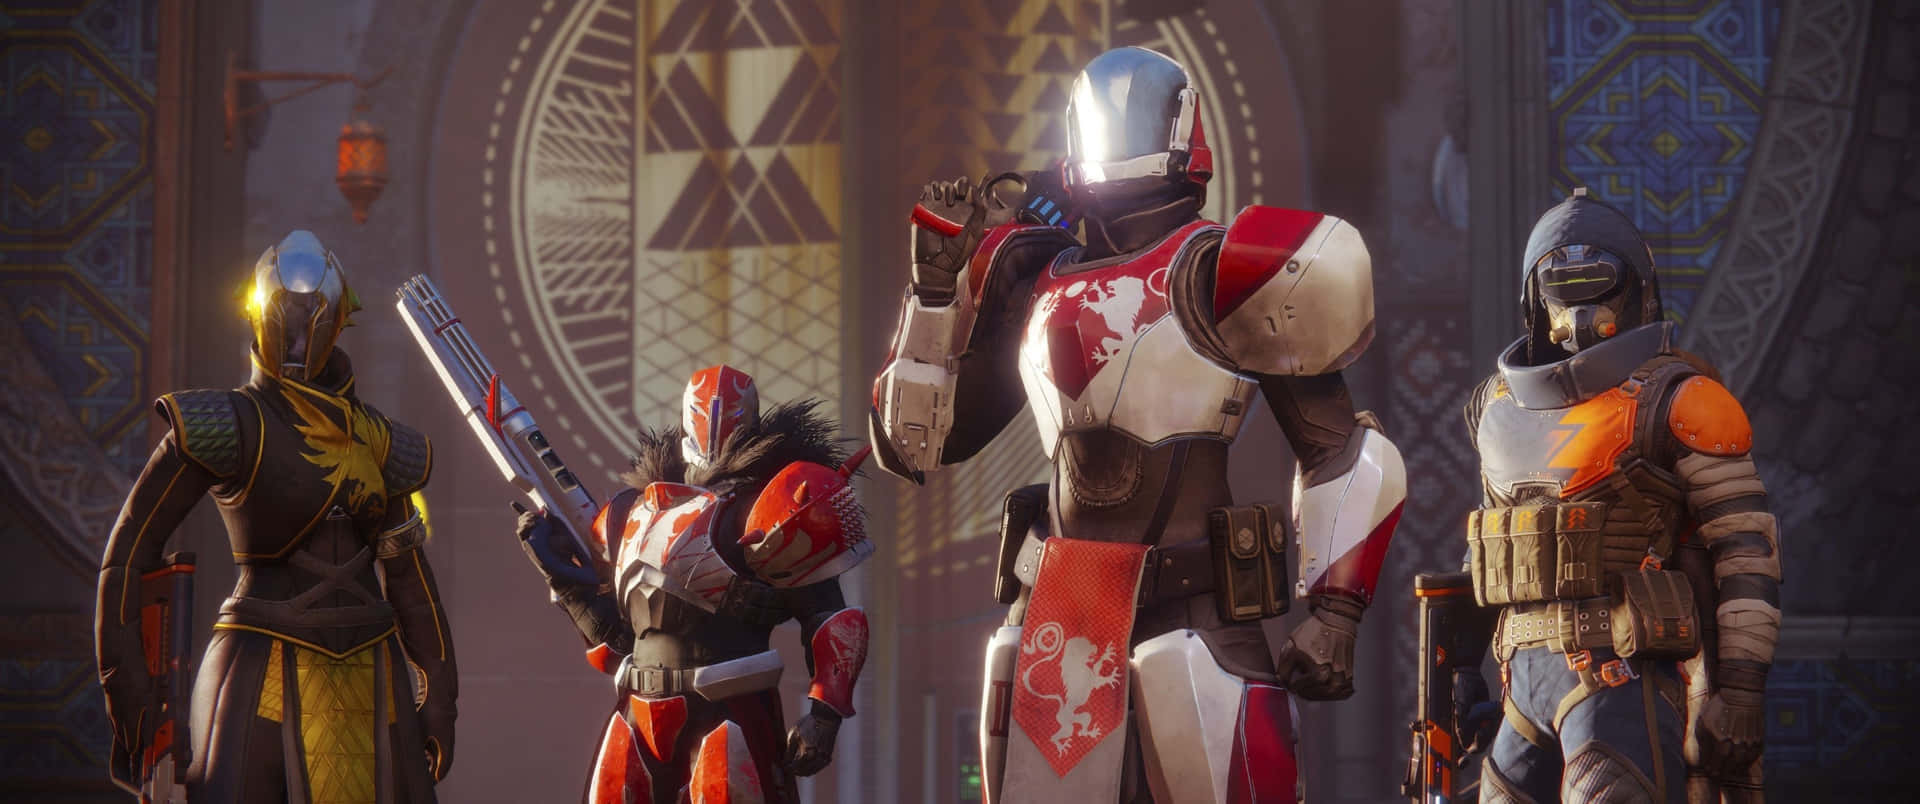 Fight to reclaim your Light in Destiny 2